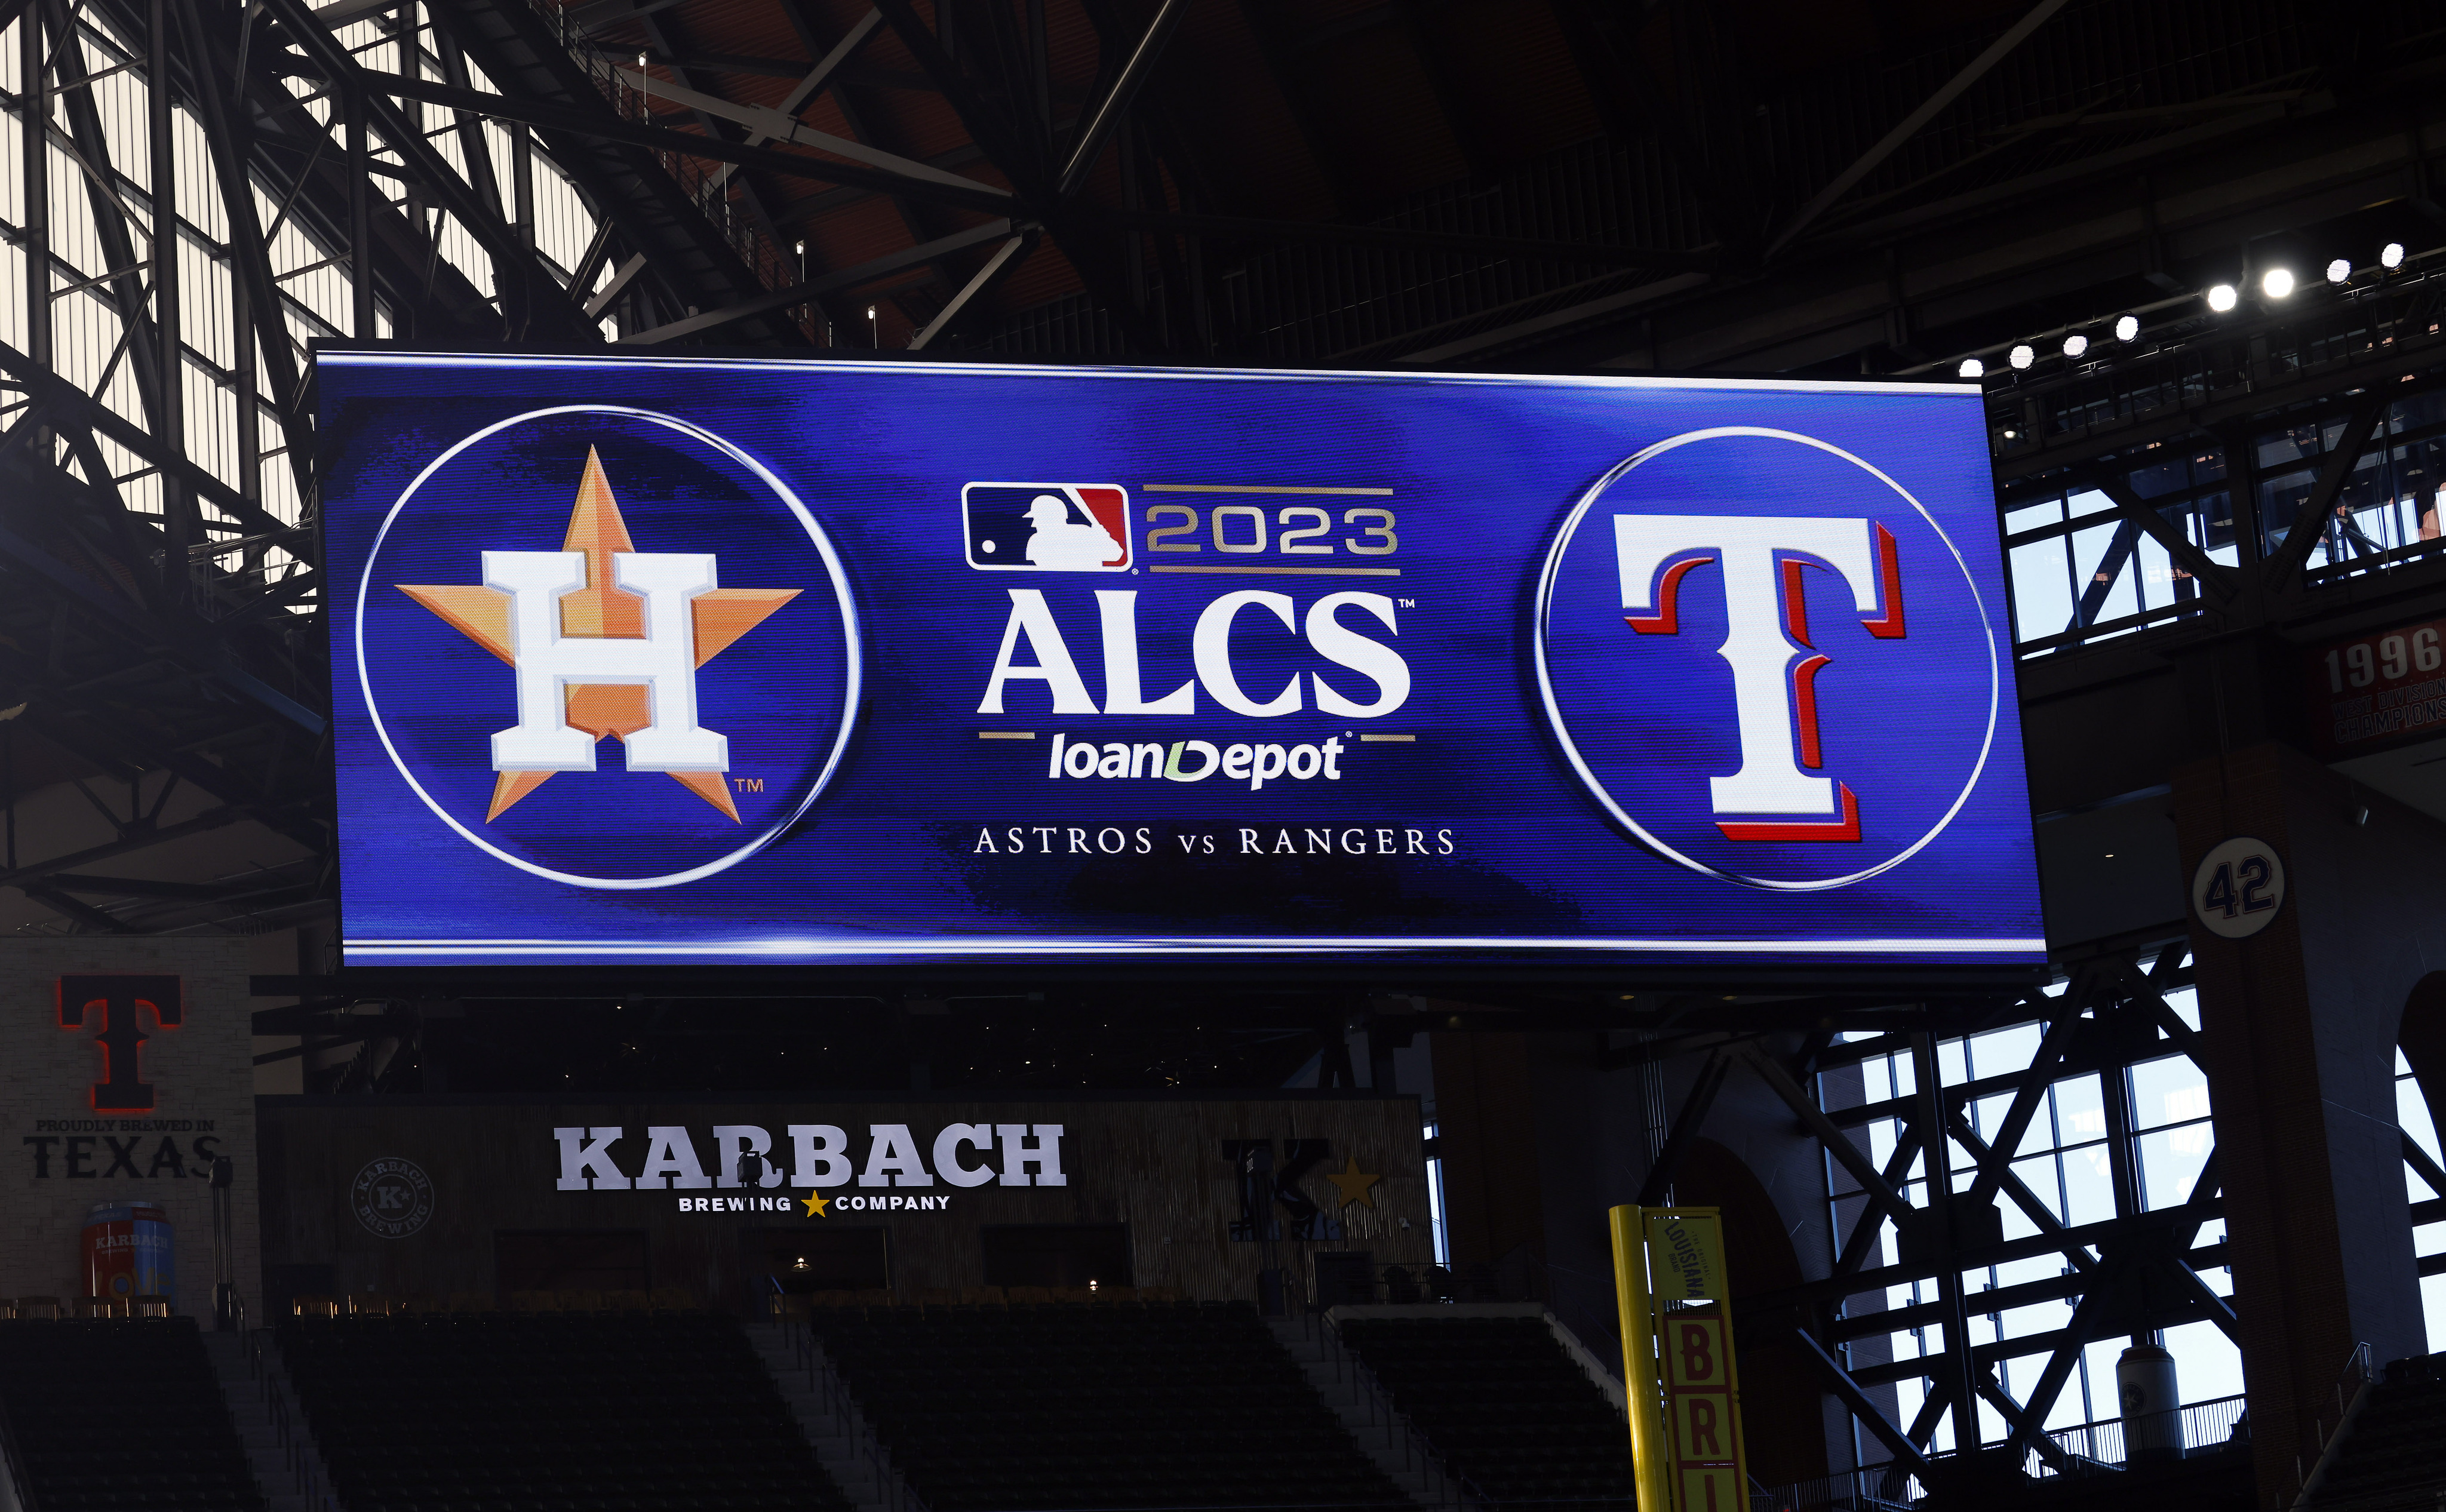 Baseball's Houston Astros To Switch Leagues In 2013 : The Two-Way